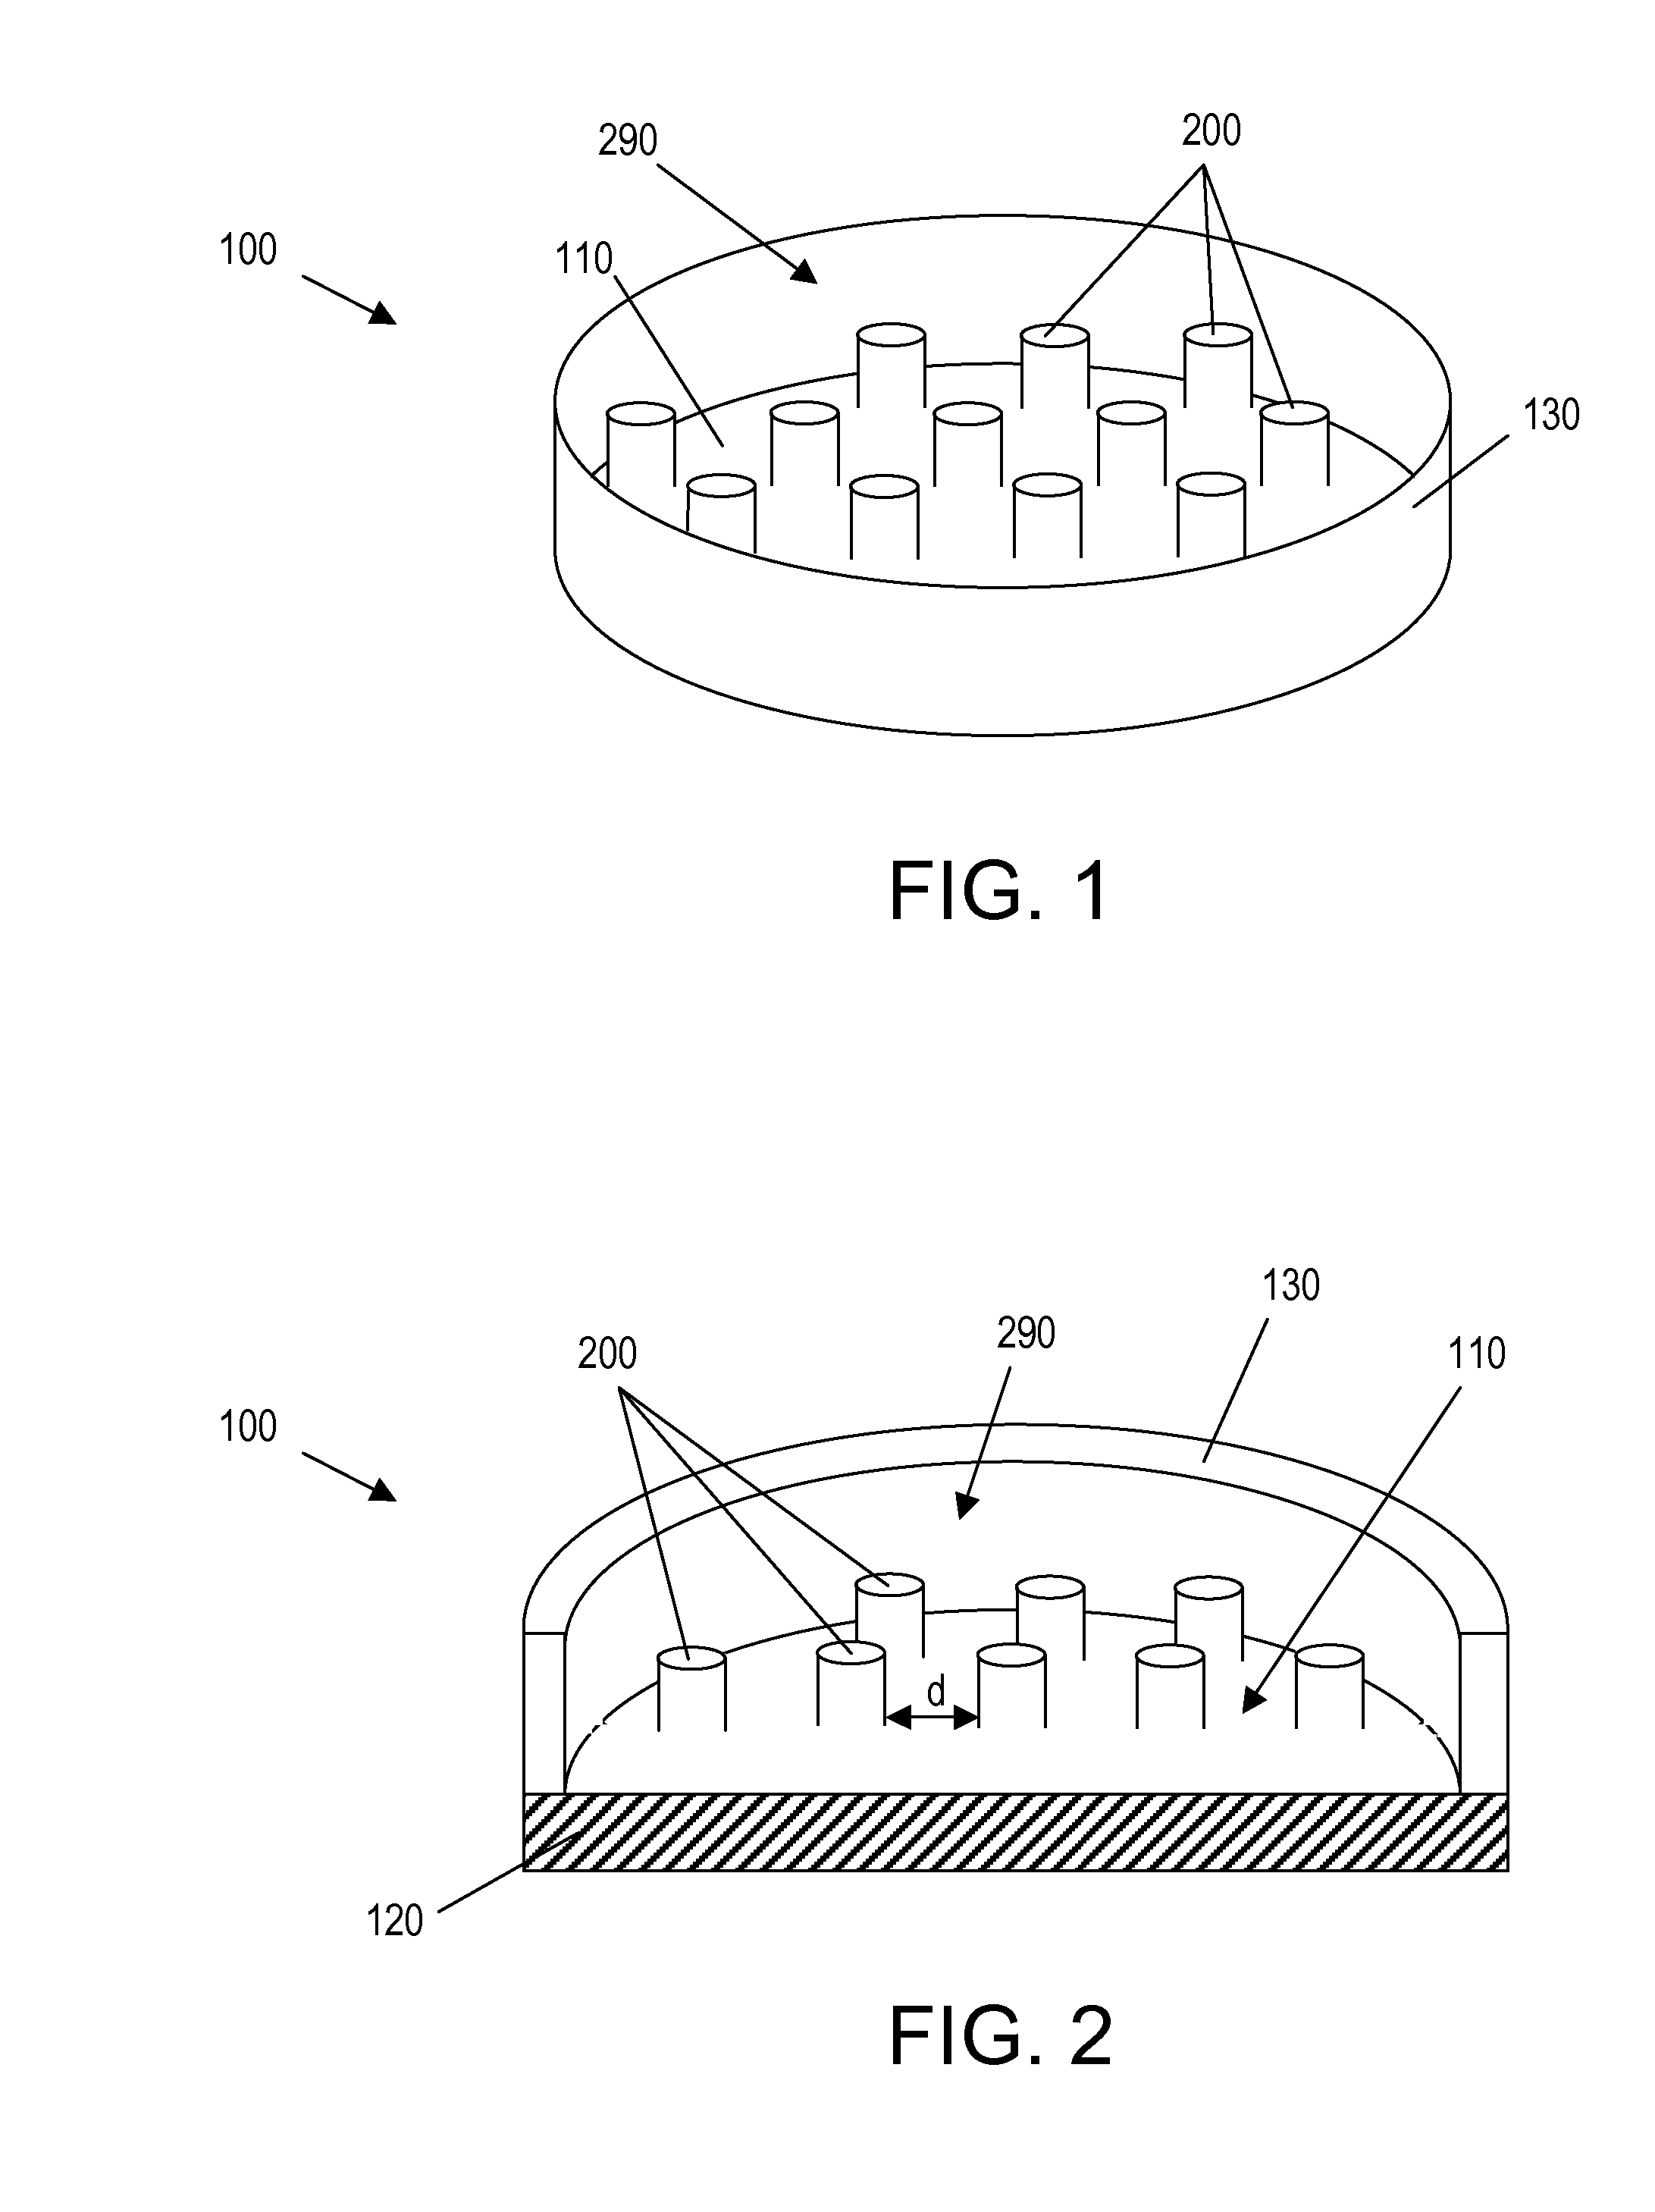 Spaced projection substrates and devices for cell culture